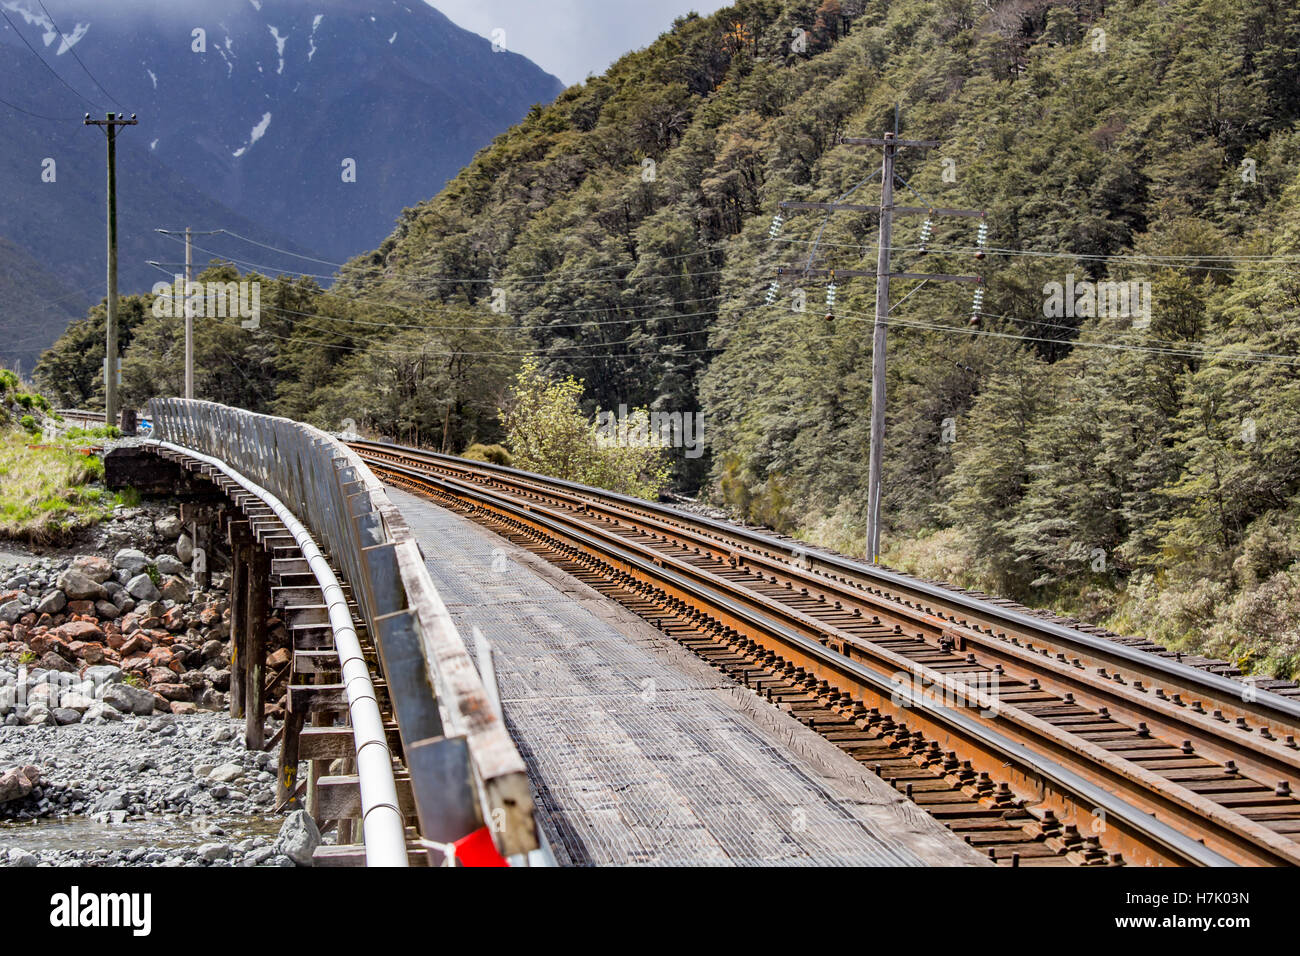 Arthur's Pass, New Zealand: The railway makes its way through the sub-alpine terrain, crossing a river on an old wooden bridge. Stock Photo